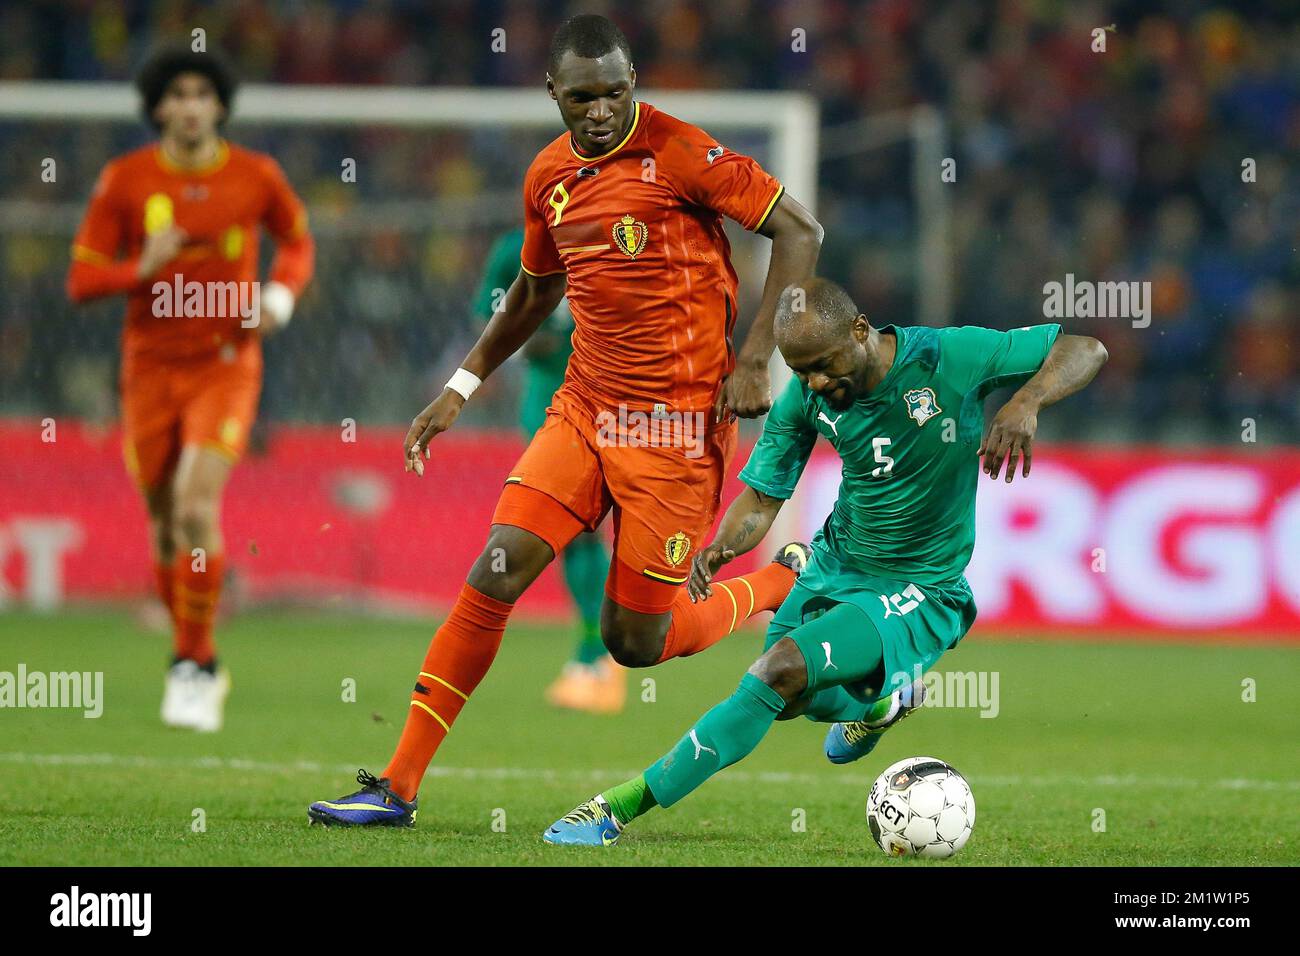 Belgium's Christian Benteke and Ivory Coast's Didier Zokora fight for the ball during a friendly soccer game between the Belgian national team the Red Devils and Ivory Coast, Wednesday 05 March 2014 in Brussels. Stock Photo